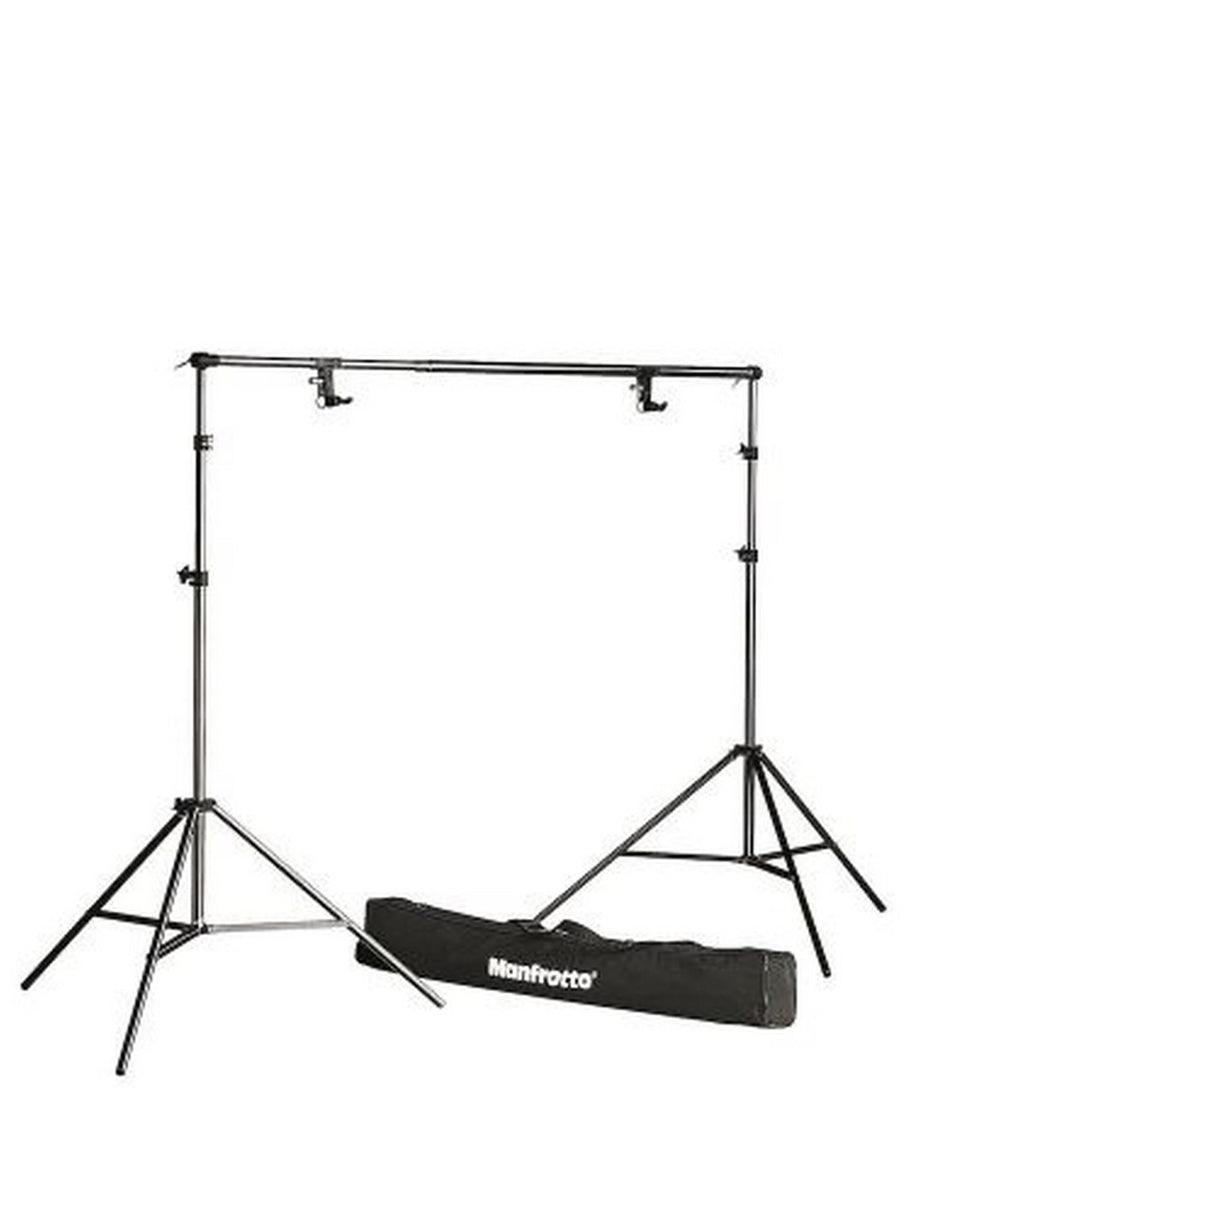 Manfrotto 1314B Complete Set with Photo Stand, Support, Bag and Spring